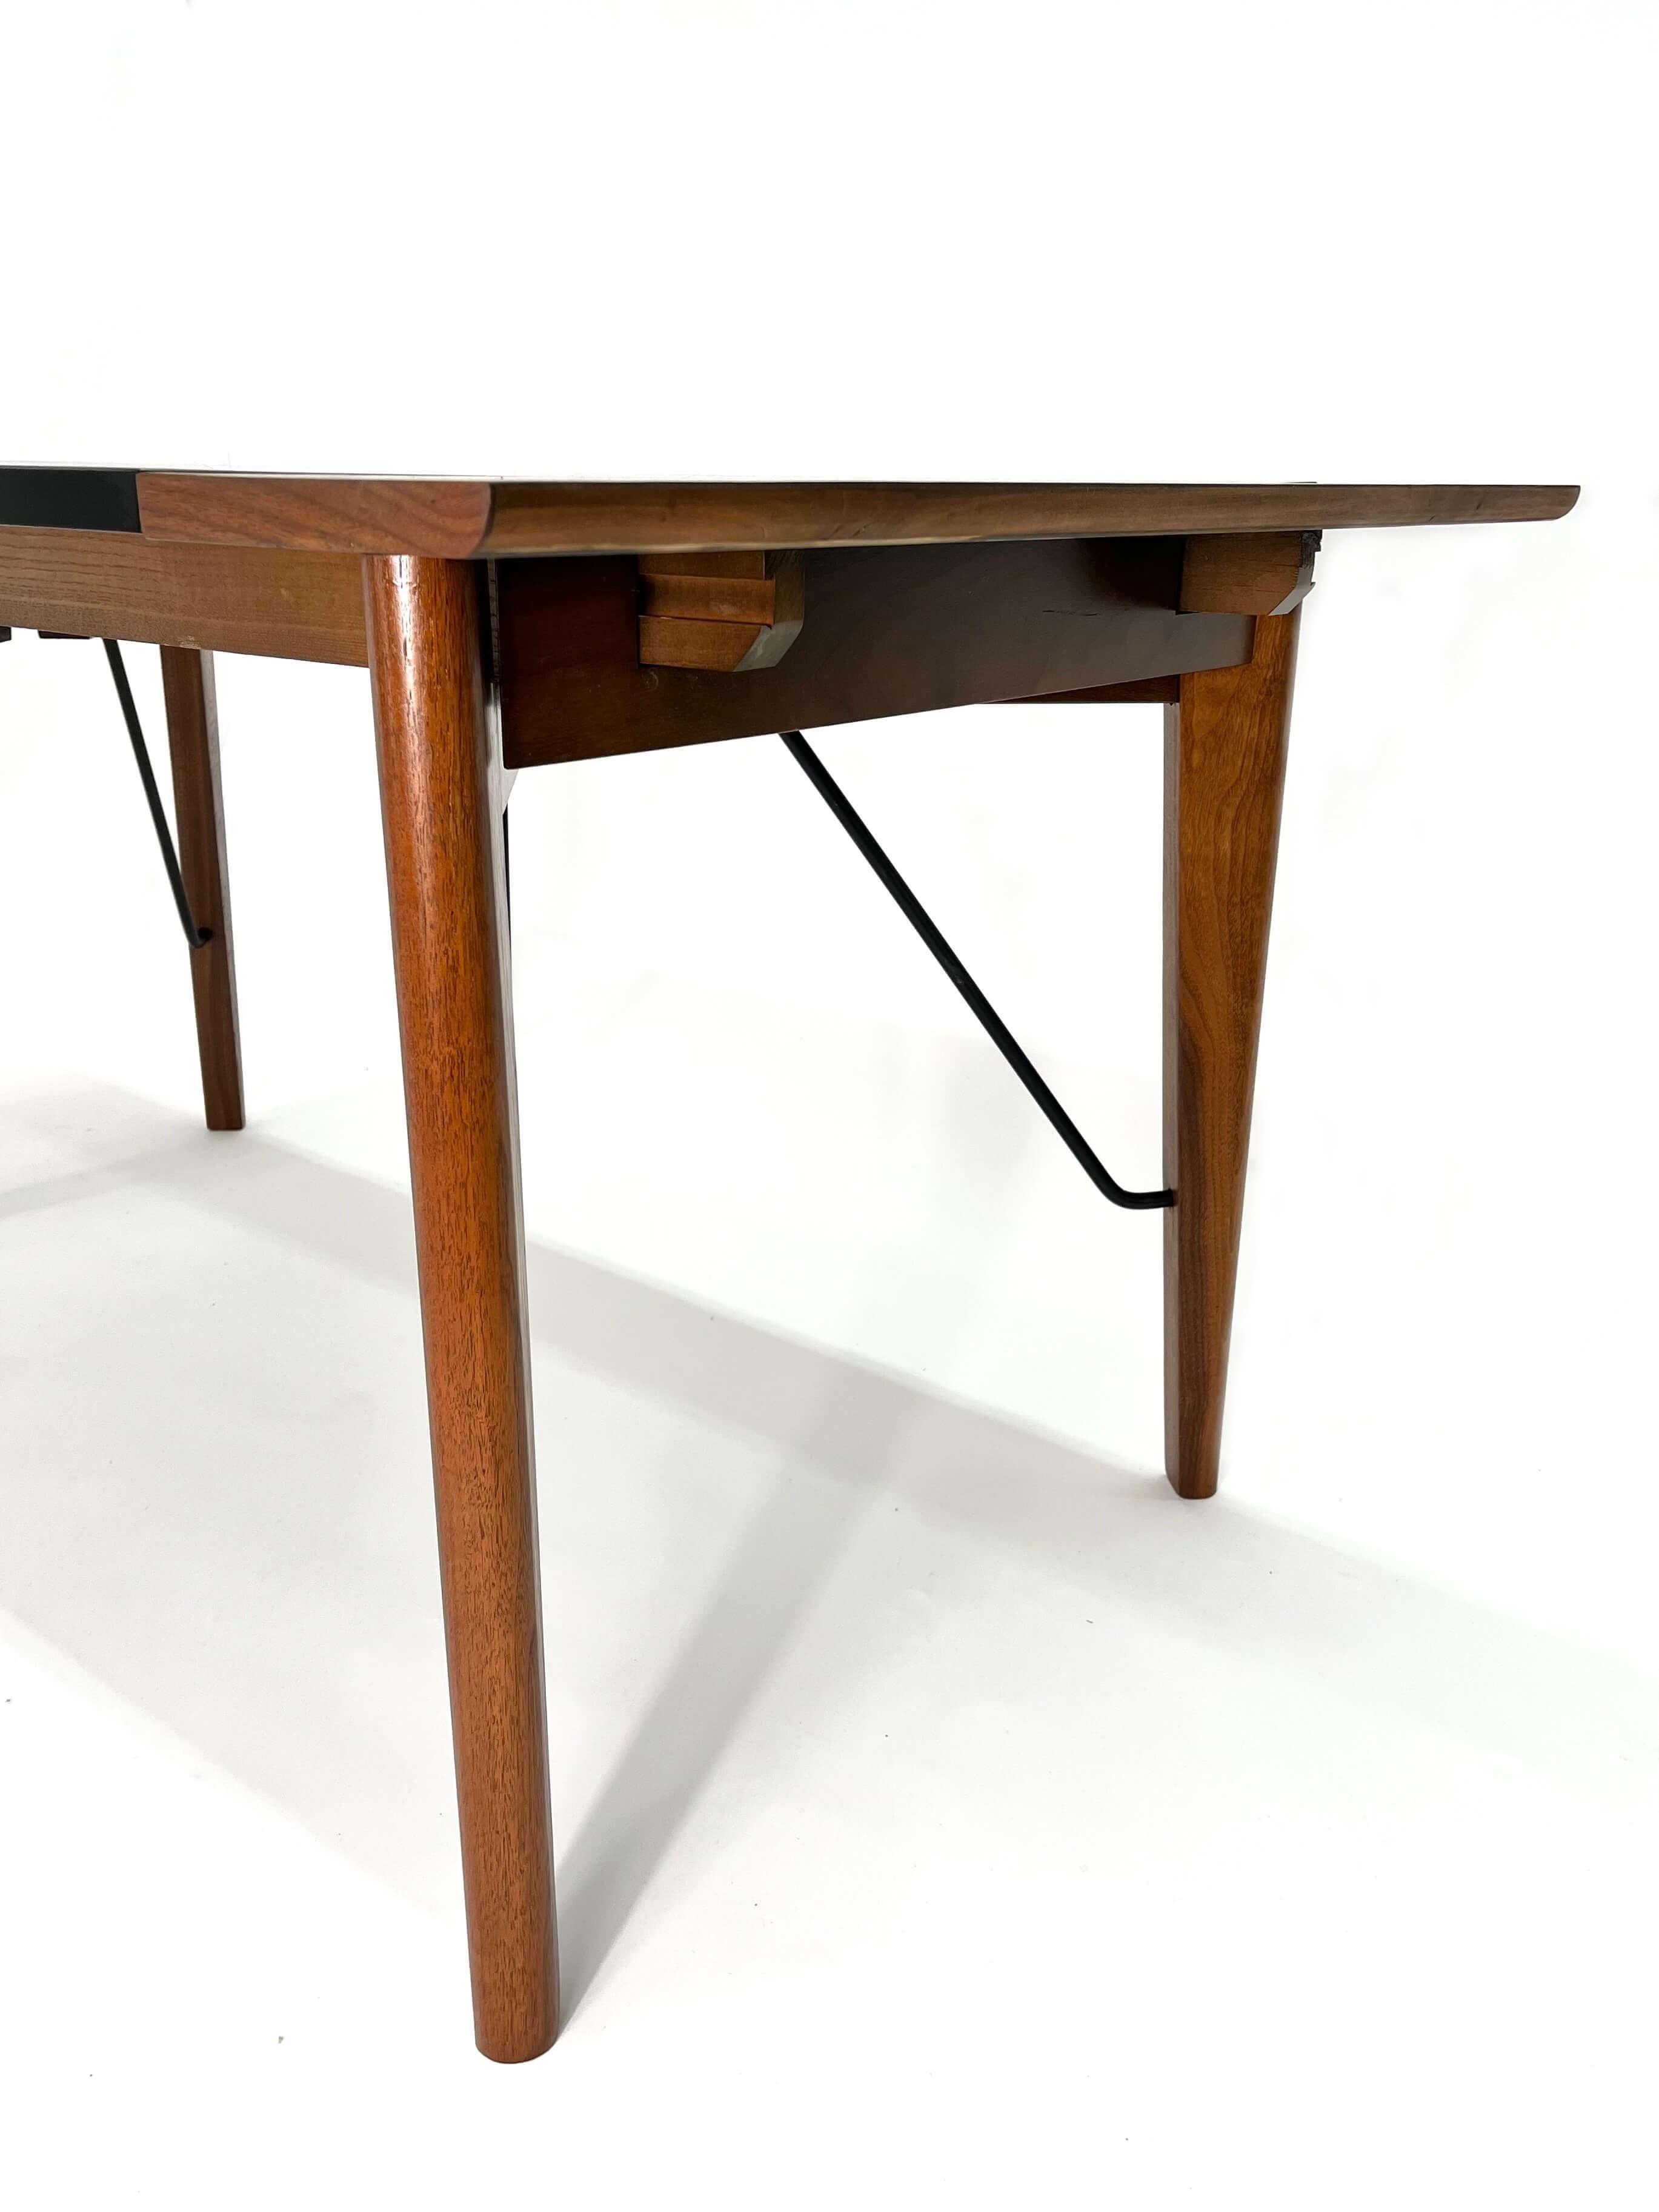 Rare Rectangular dining table by Greta M. Grossman for Glenn of California, circa. 1950s. The table features a solid walnut wood frame with a black laminate top and iron stretchers supporting the legs. The expandable table has two removable leaves,